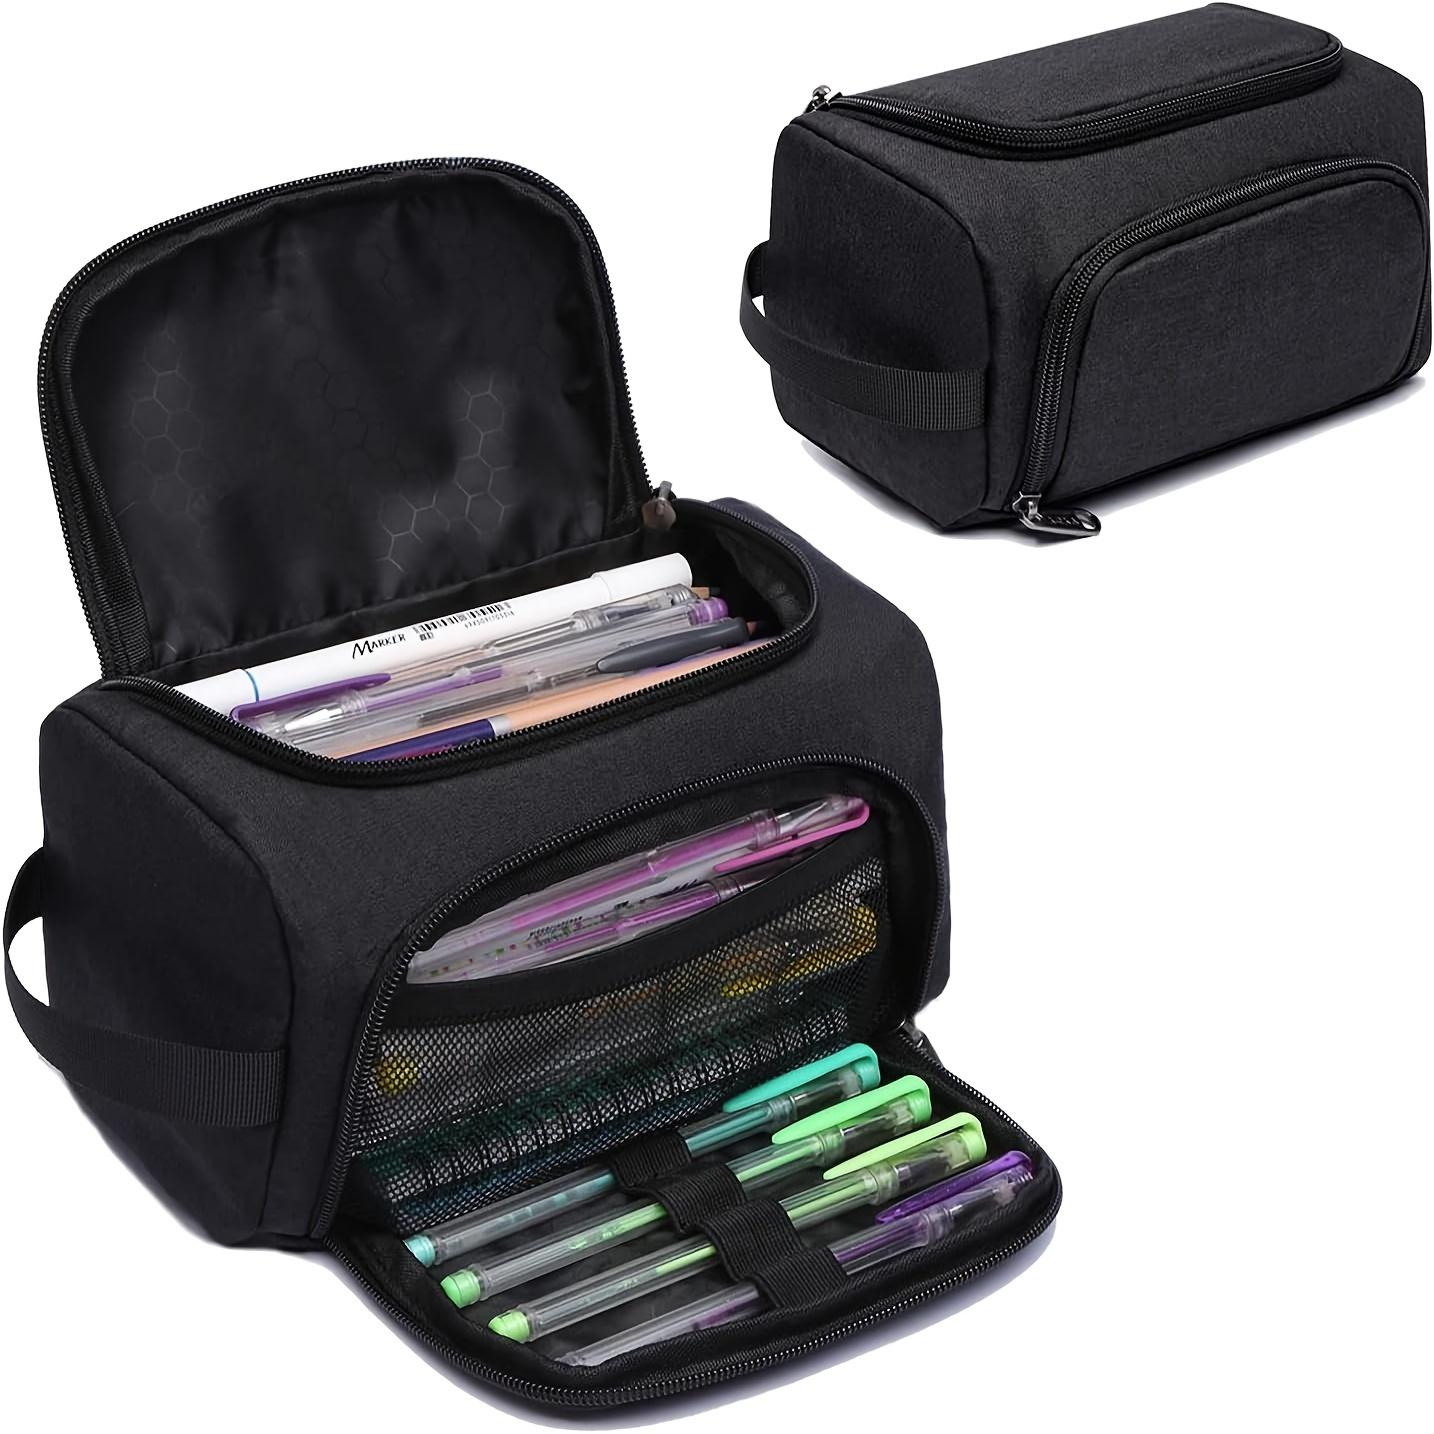 

Extra-large Multi-compartment Pencil Case - Durable Polyester, Ideal For School & Travel, Black